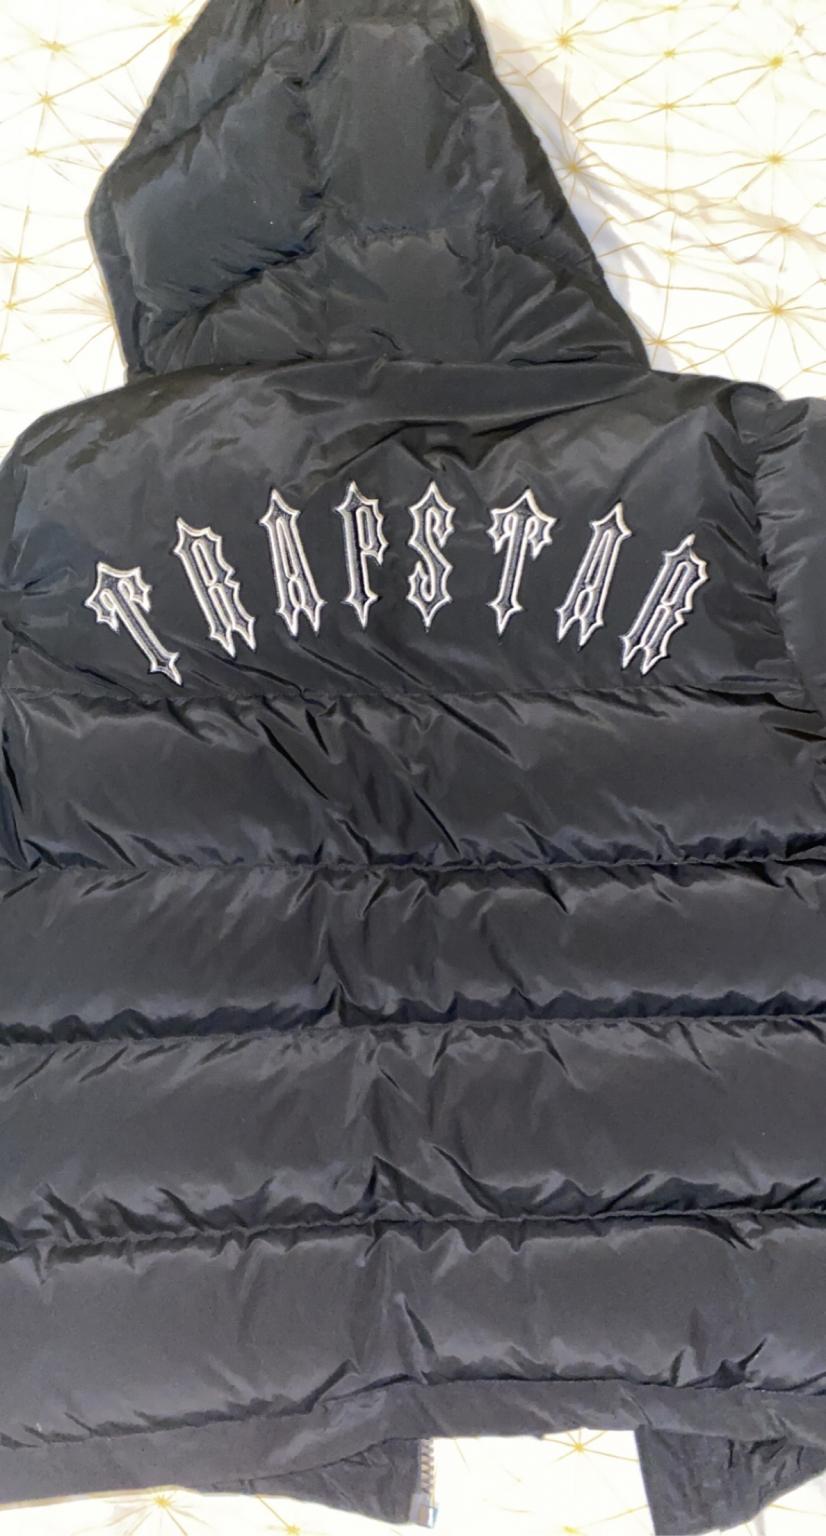 Trapstar irongate jacket in RM9 London for £200.00 for sale | Shpock